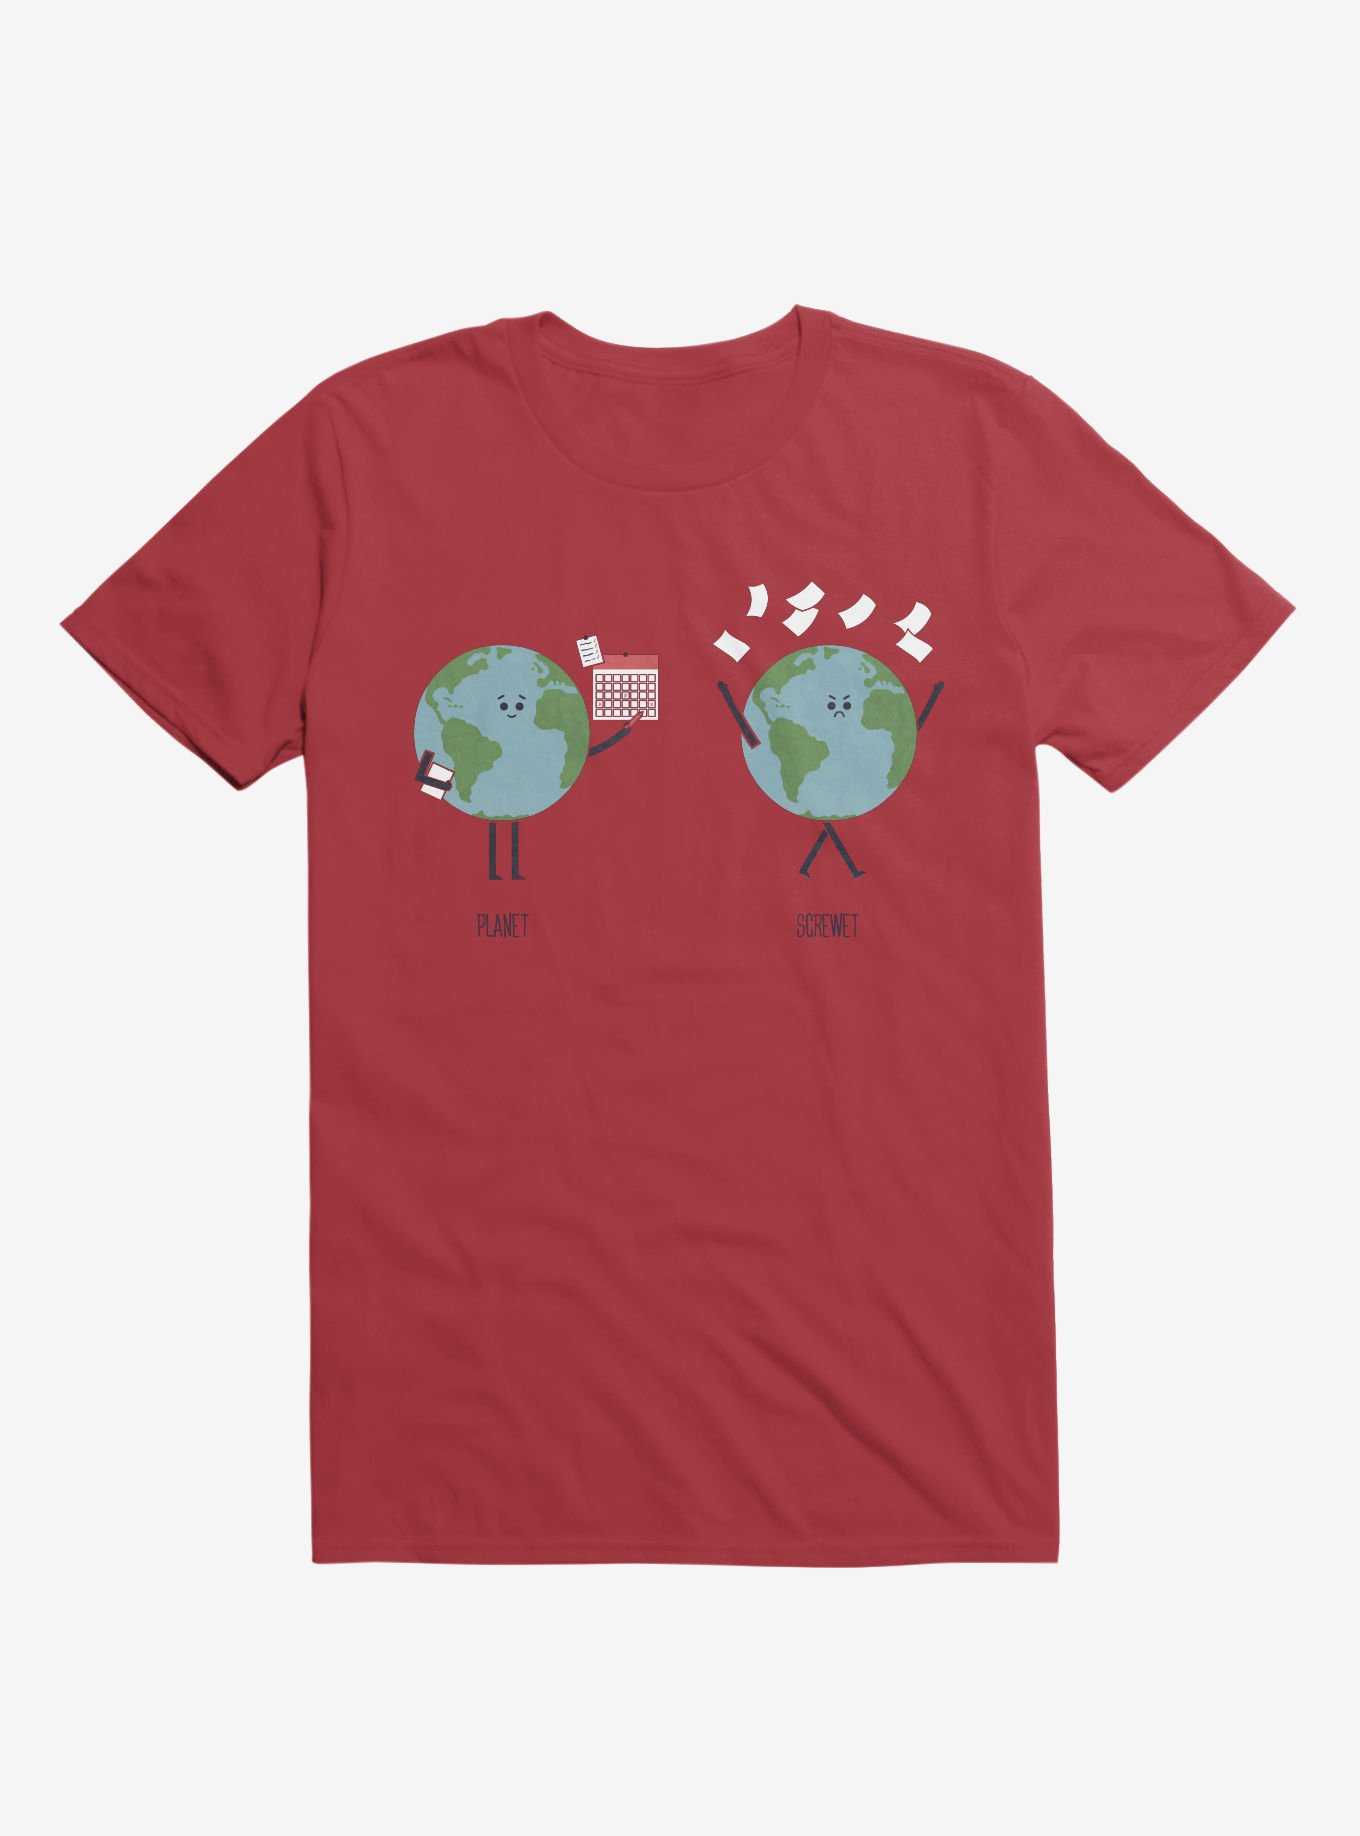 Opposites Planet Screwet Red T-Shirt, , hi-res